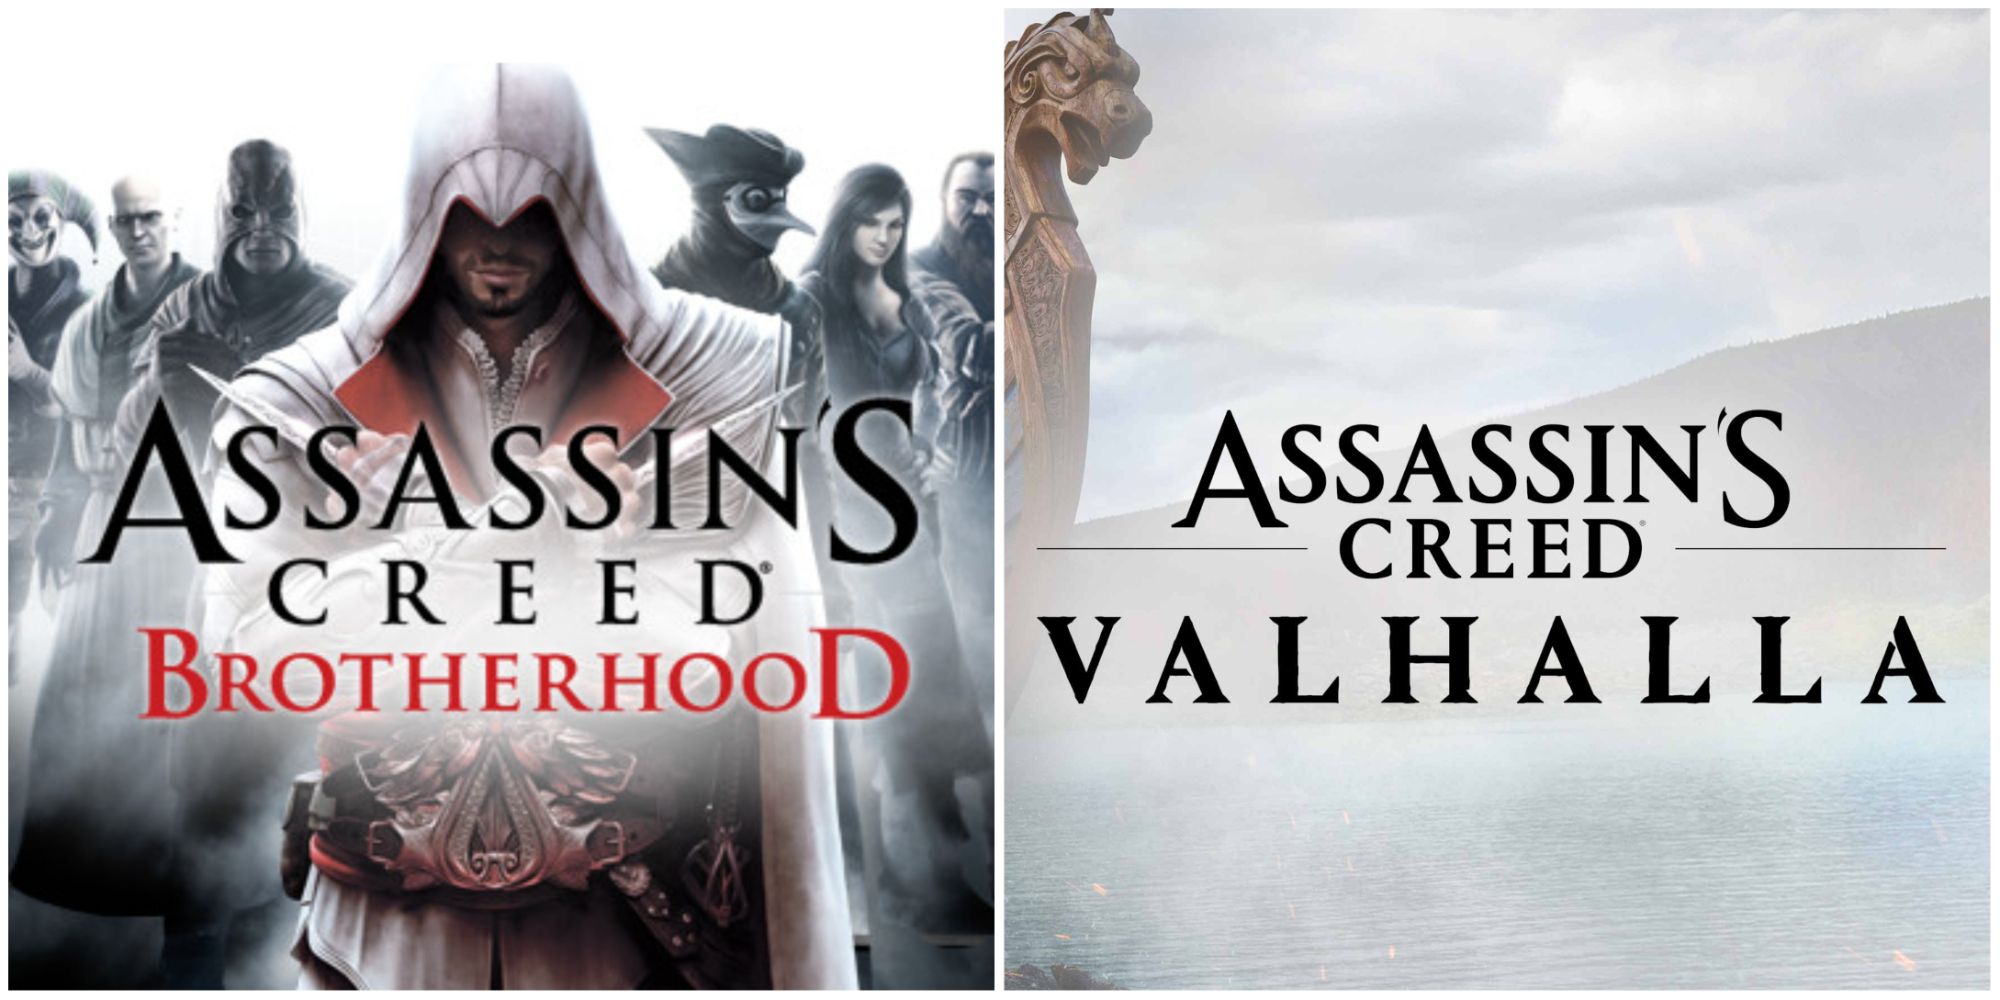 Comparing the logo for the Assassin's Creed games Brotherhood and Valhalla